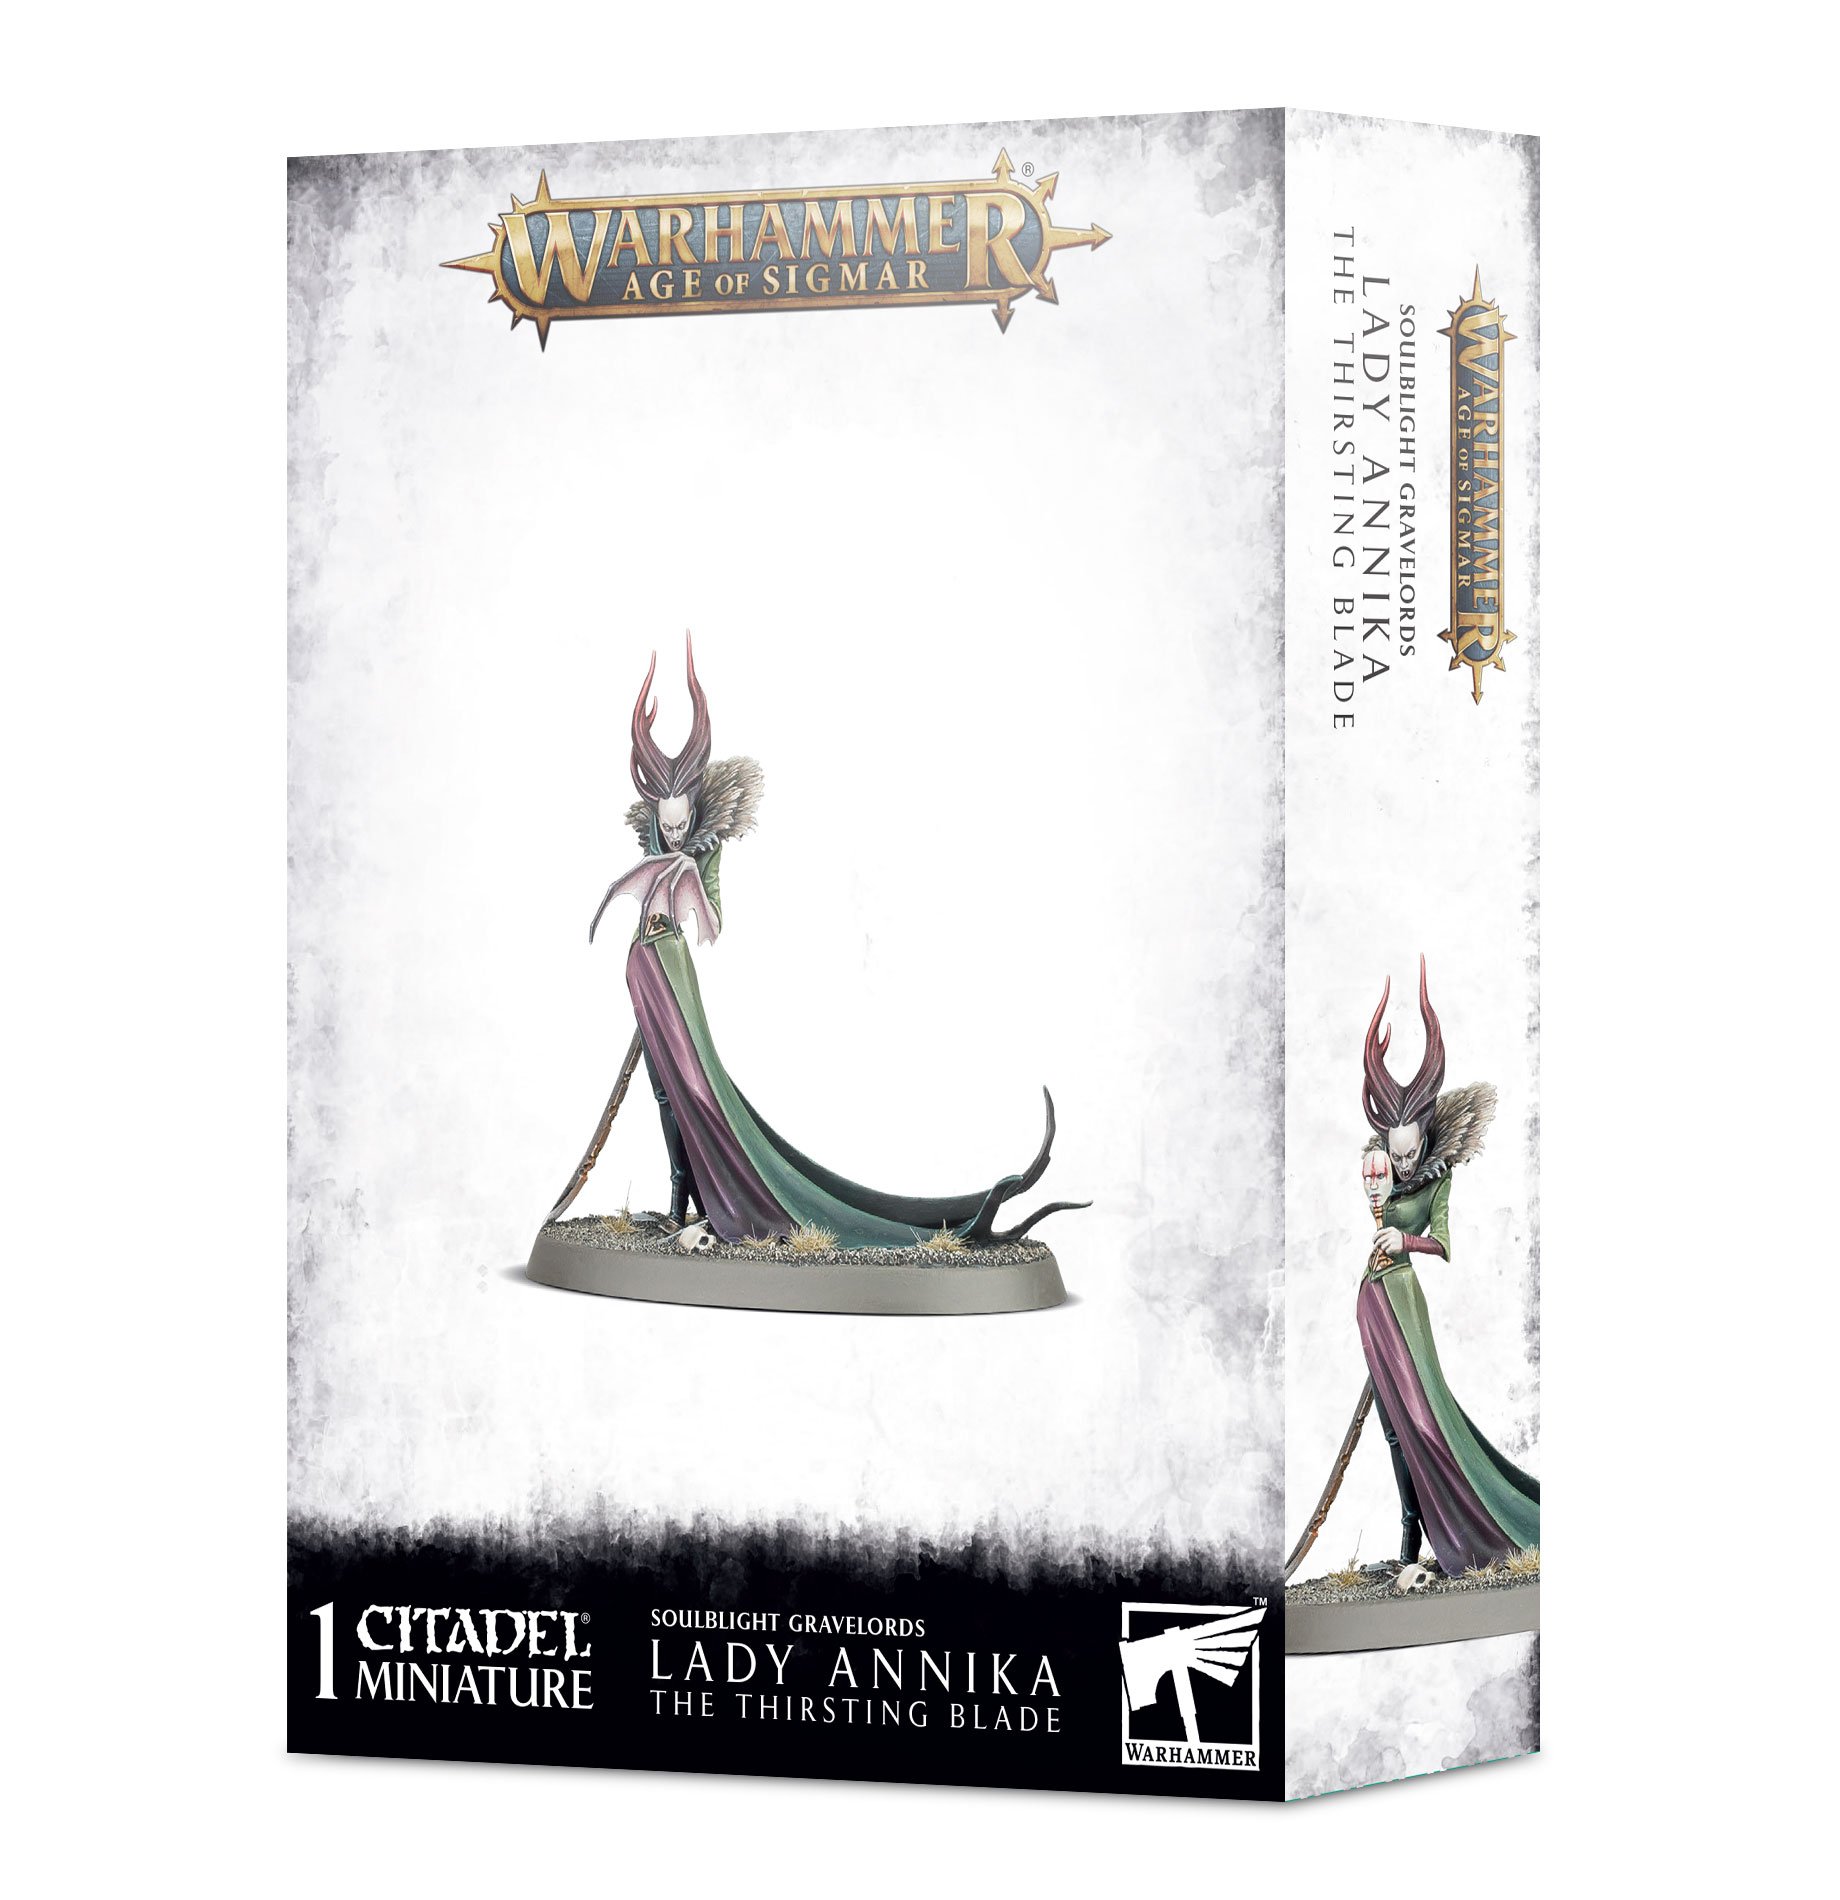 Warhammer Age Of Sigmar: Soulblight Gravelords: Lady Annika - The Thirsting Blade 